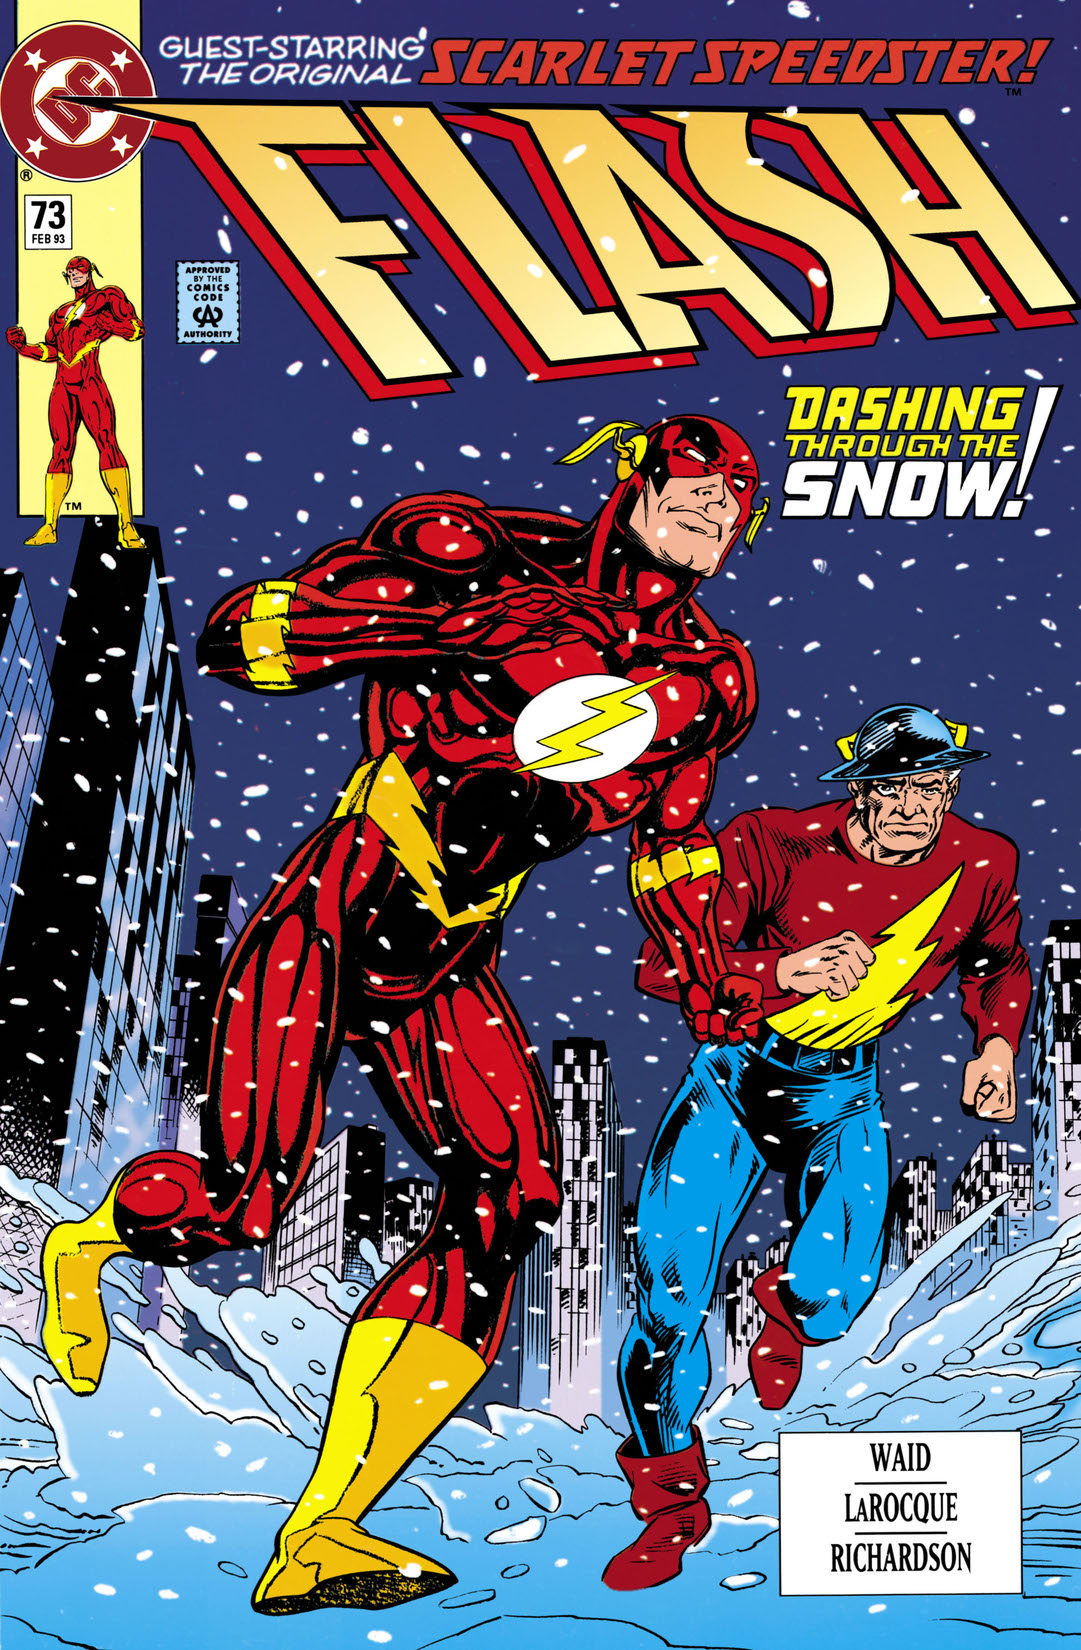 The Flash (1987-) #73 preview images